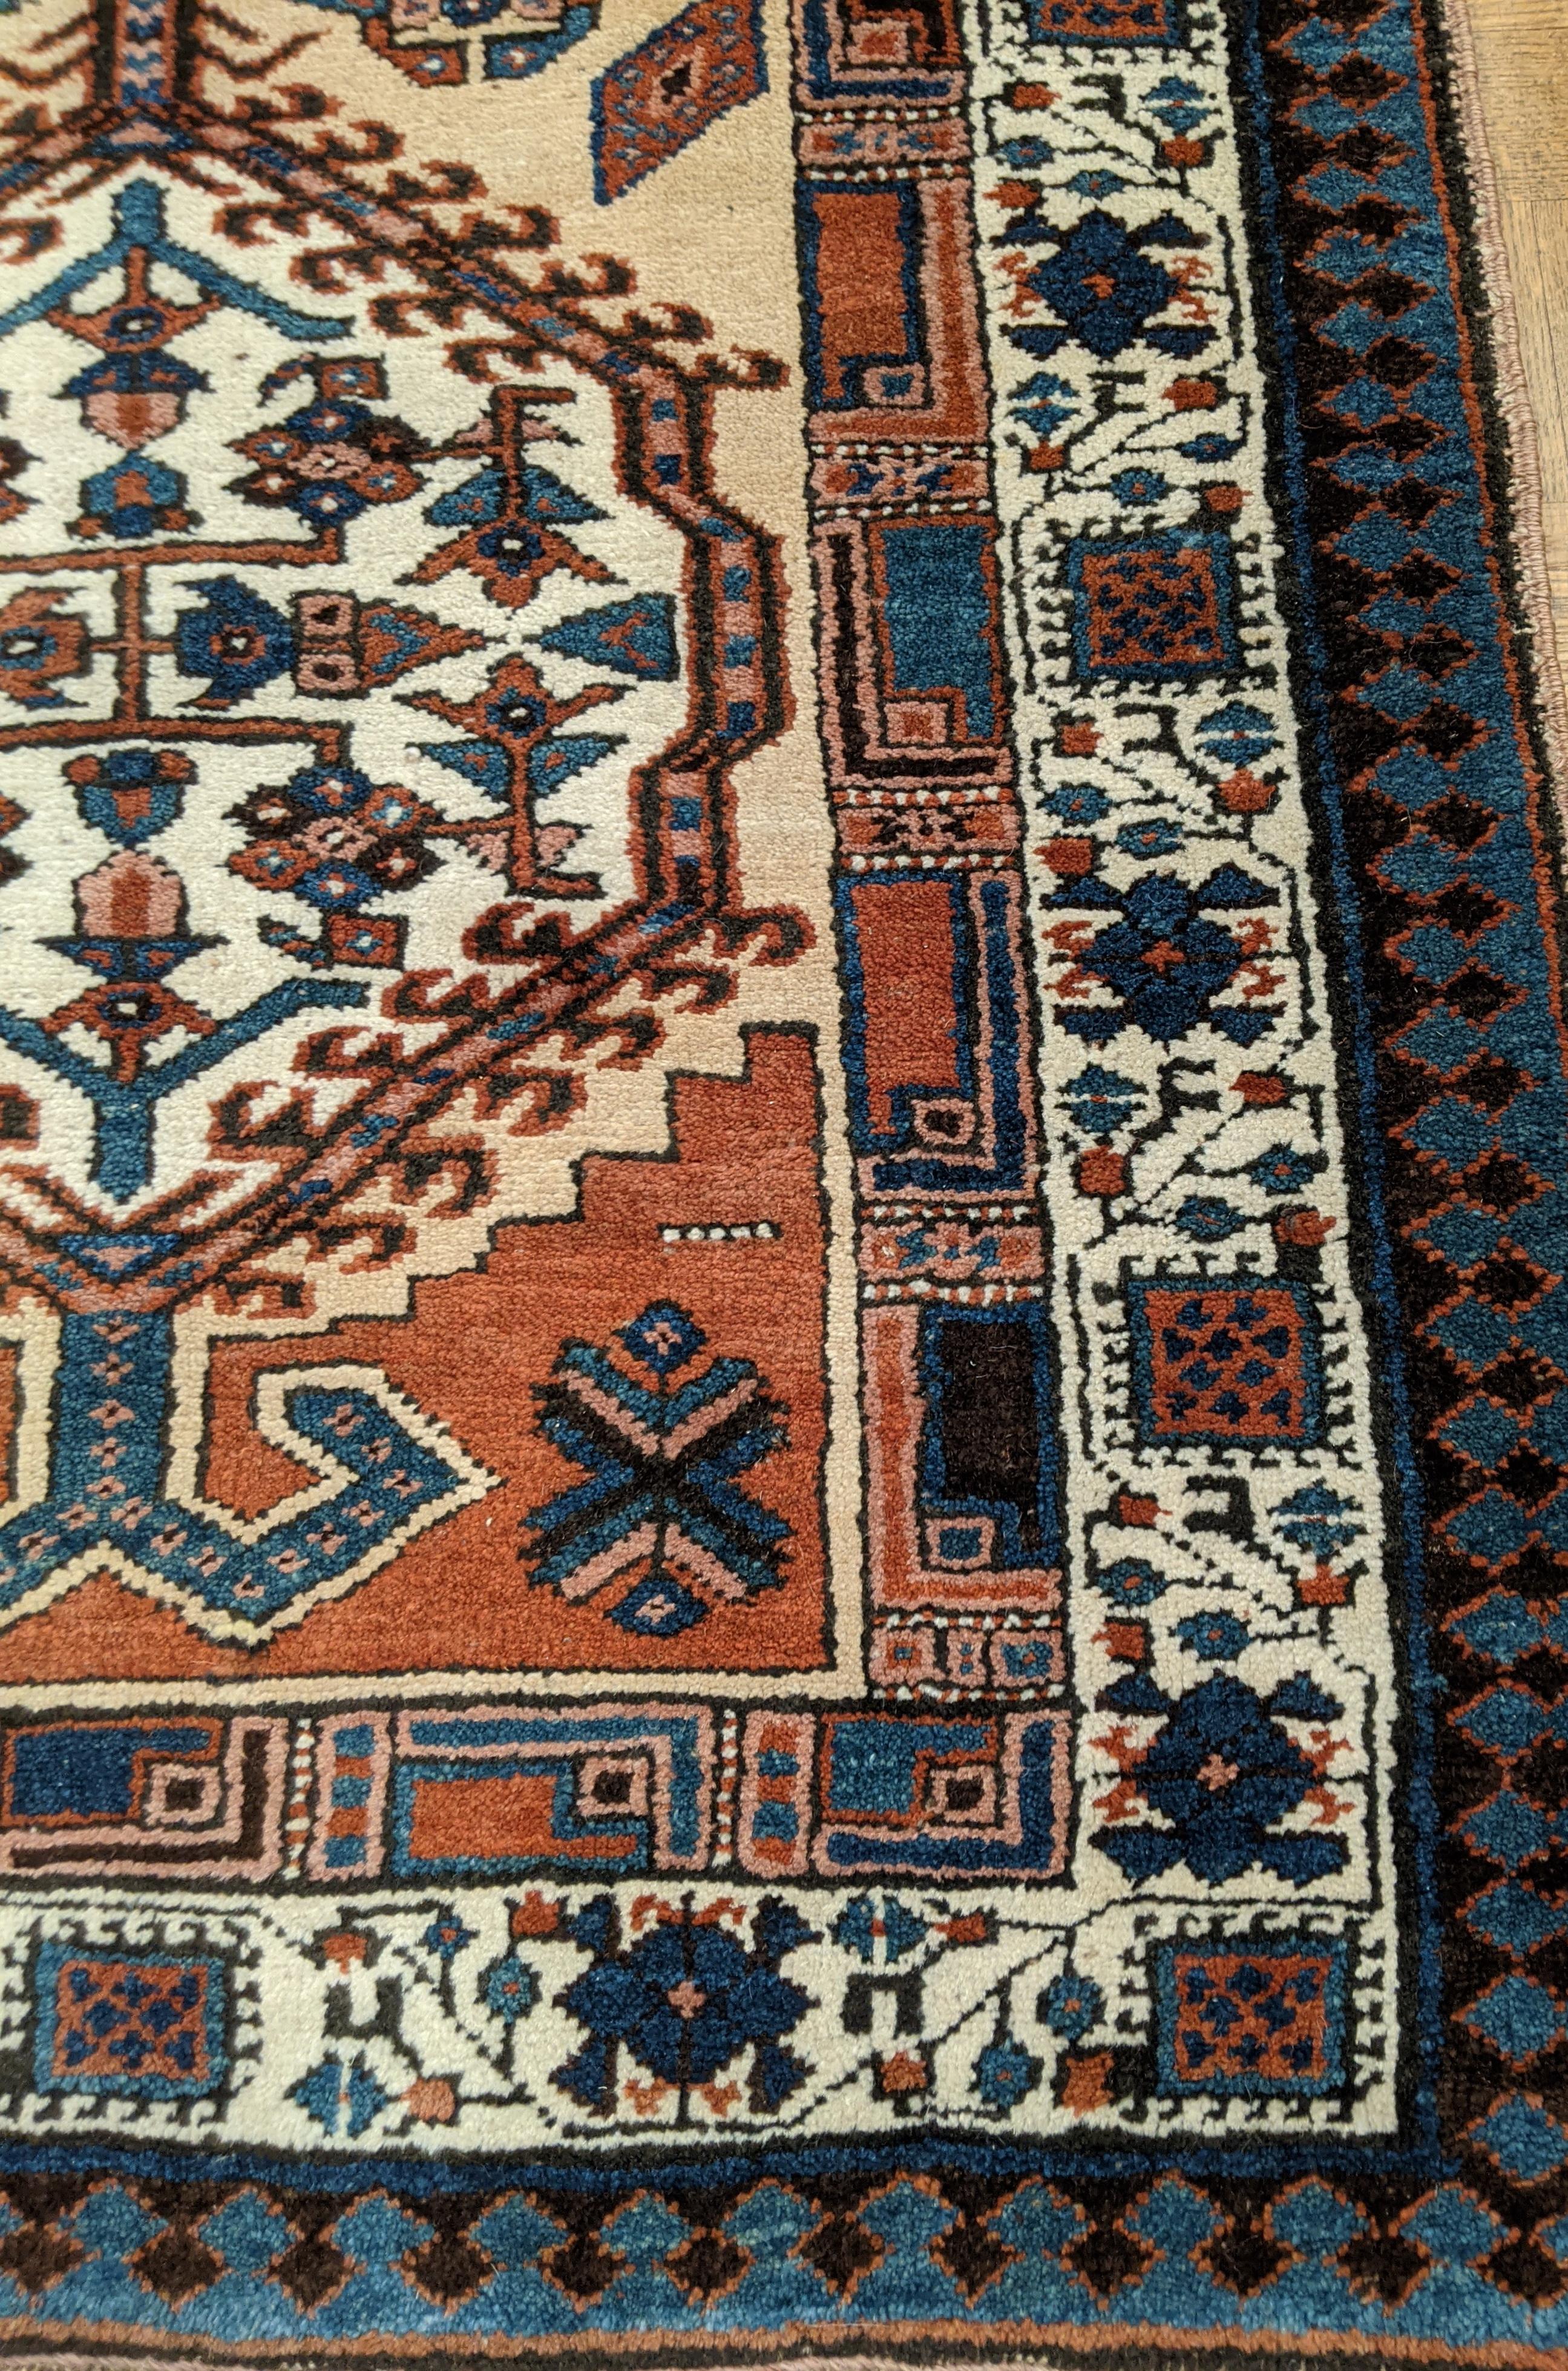 This is a striking antique Persian Serab. Serab rugs are known for their geometric design as well as the use of camel color. The typical Serab motif with the use of a cinnamon rust color is accented on the camel field. This rug is 3-1x6-10 and is